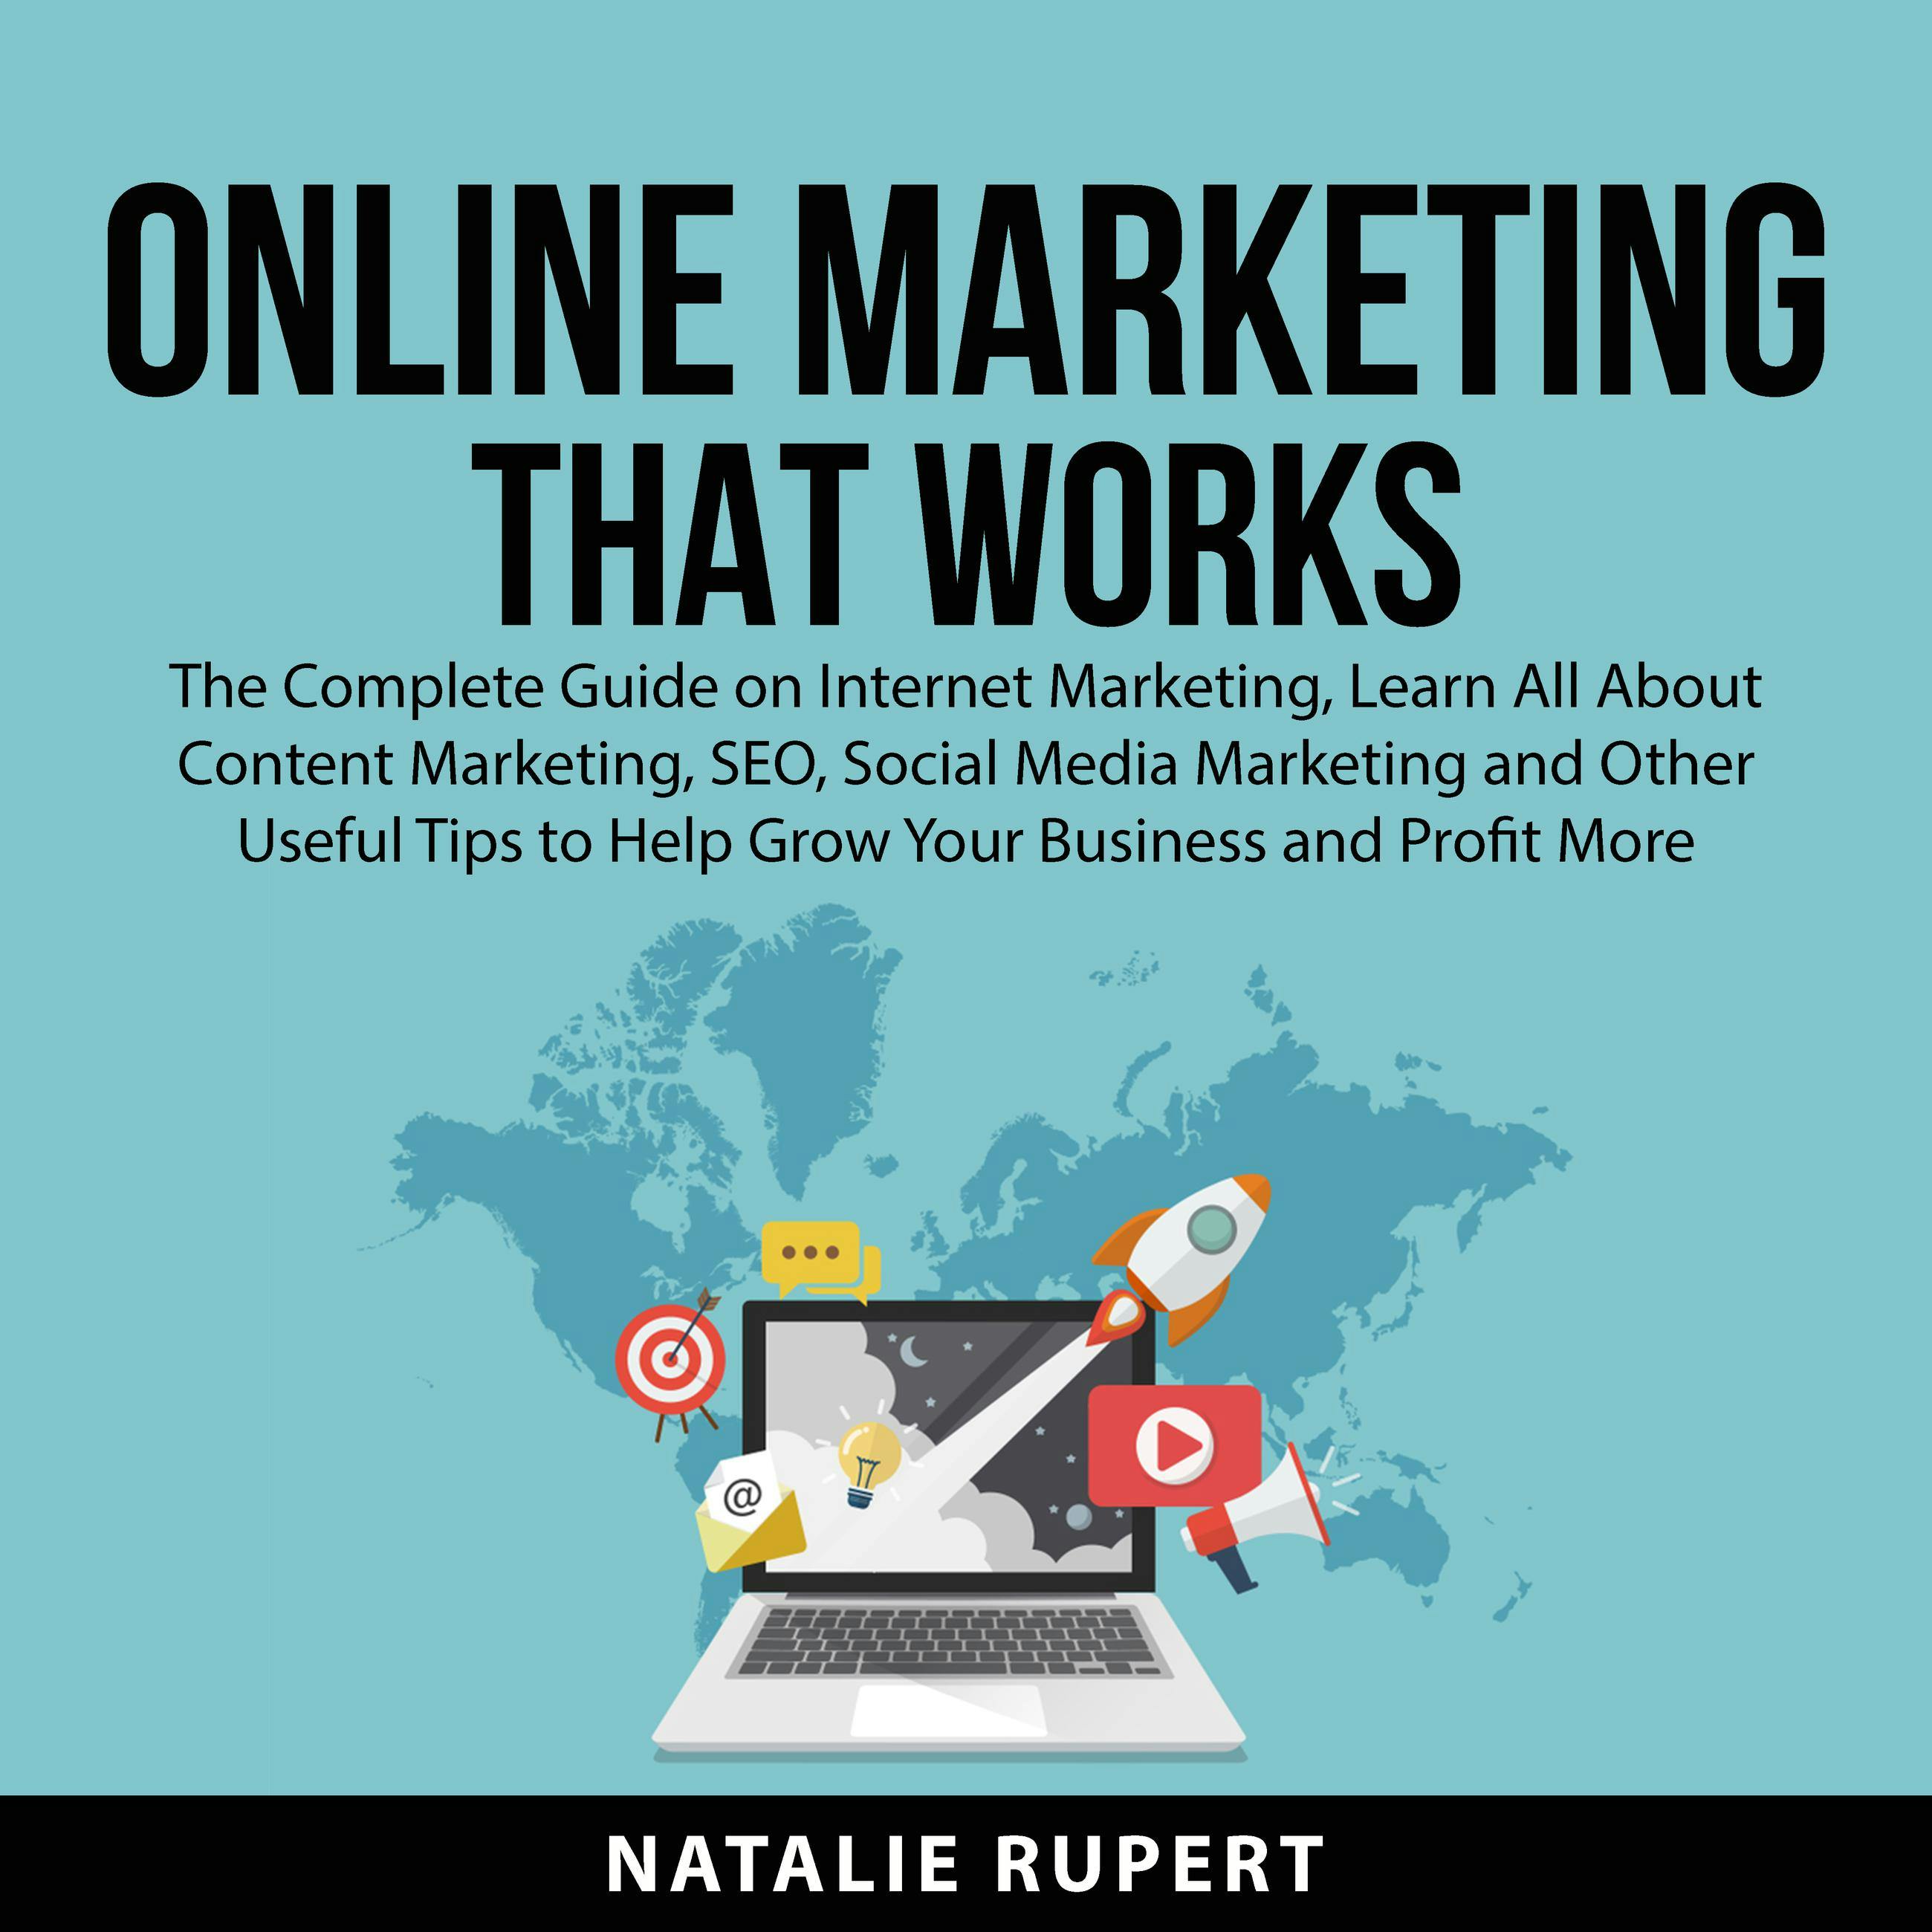 Online Marketing That Works: The Complete Guide on Internet Marketing, Learn All About Content Marketing, SEO, Social Media Marketing and Other Useful Tips to Help Grow Your Business and Profit More - undefined